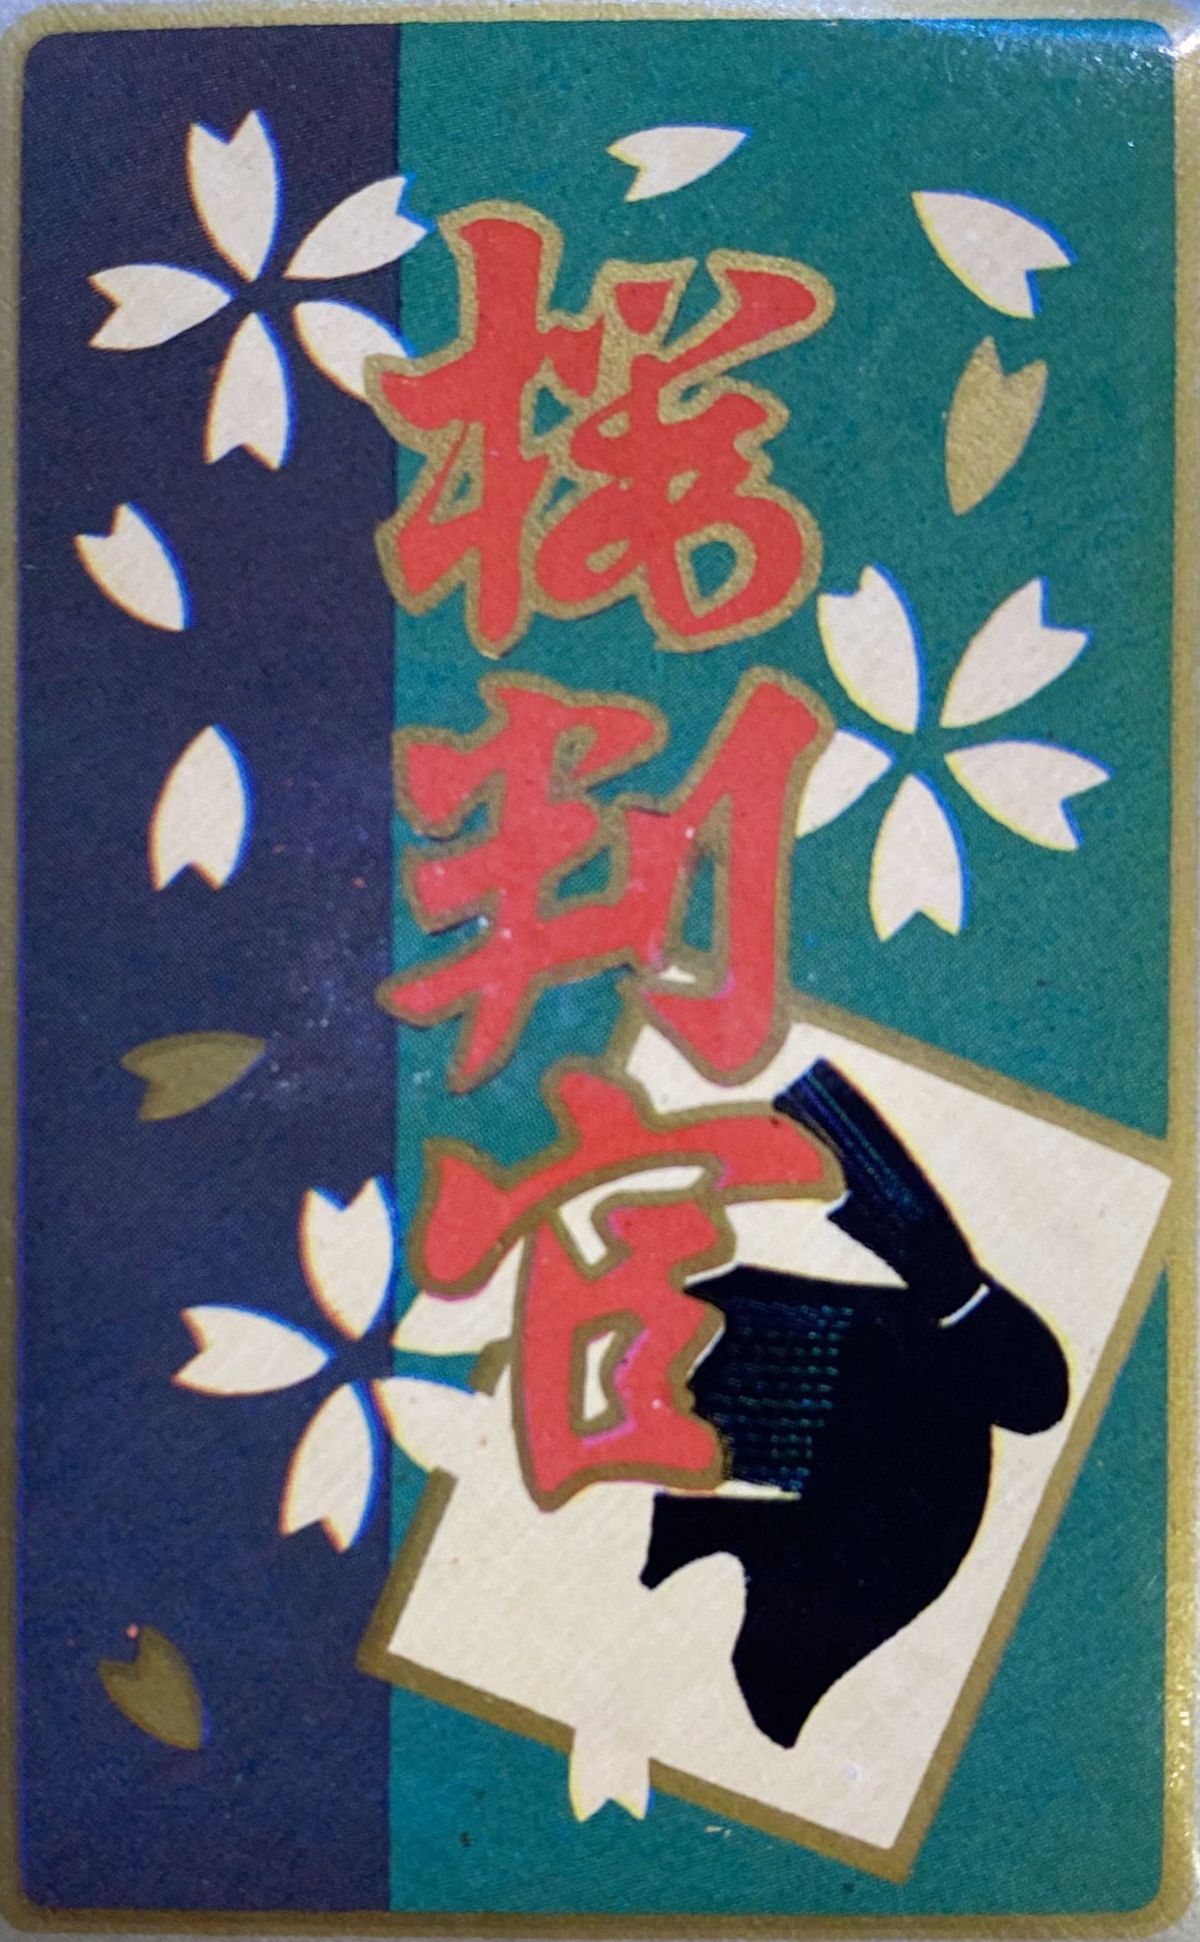 A hanafuda wrapper with an image of a Japanese judgeâ€™s haircut and cherry blossoms.